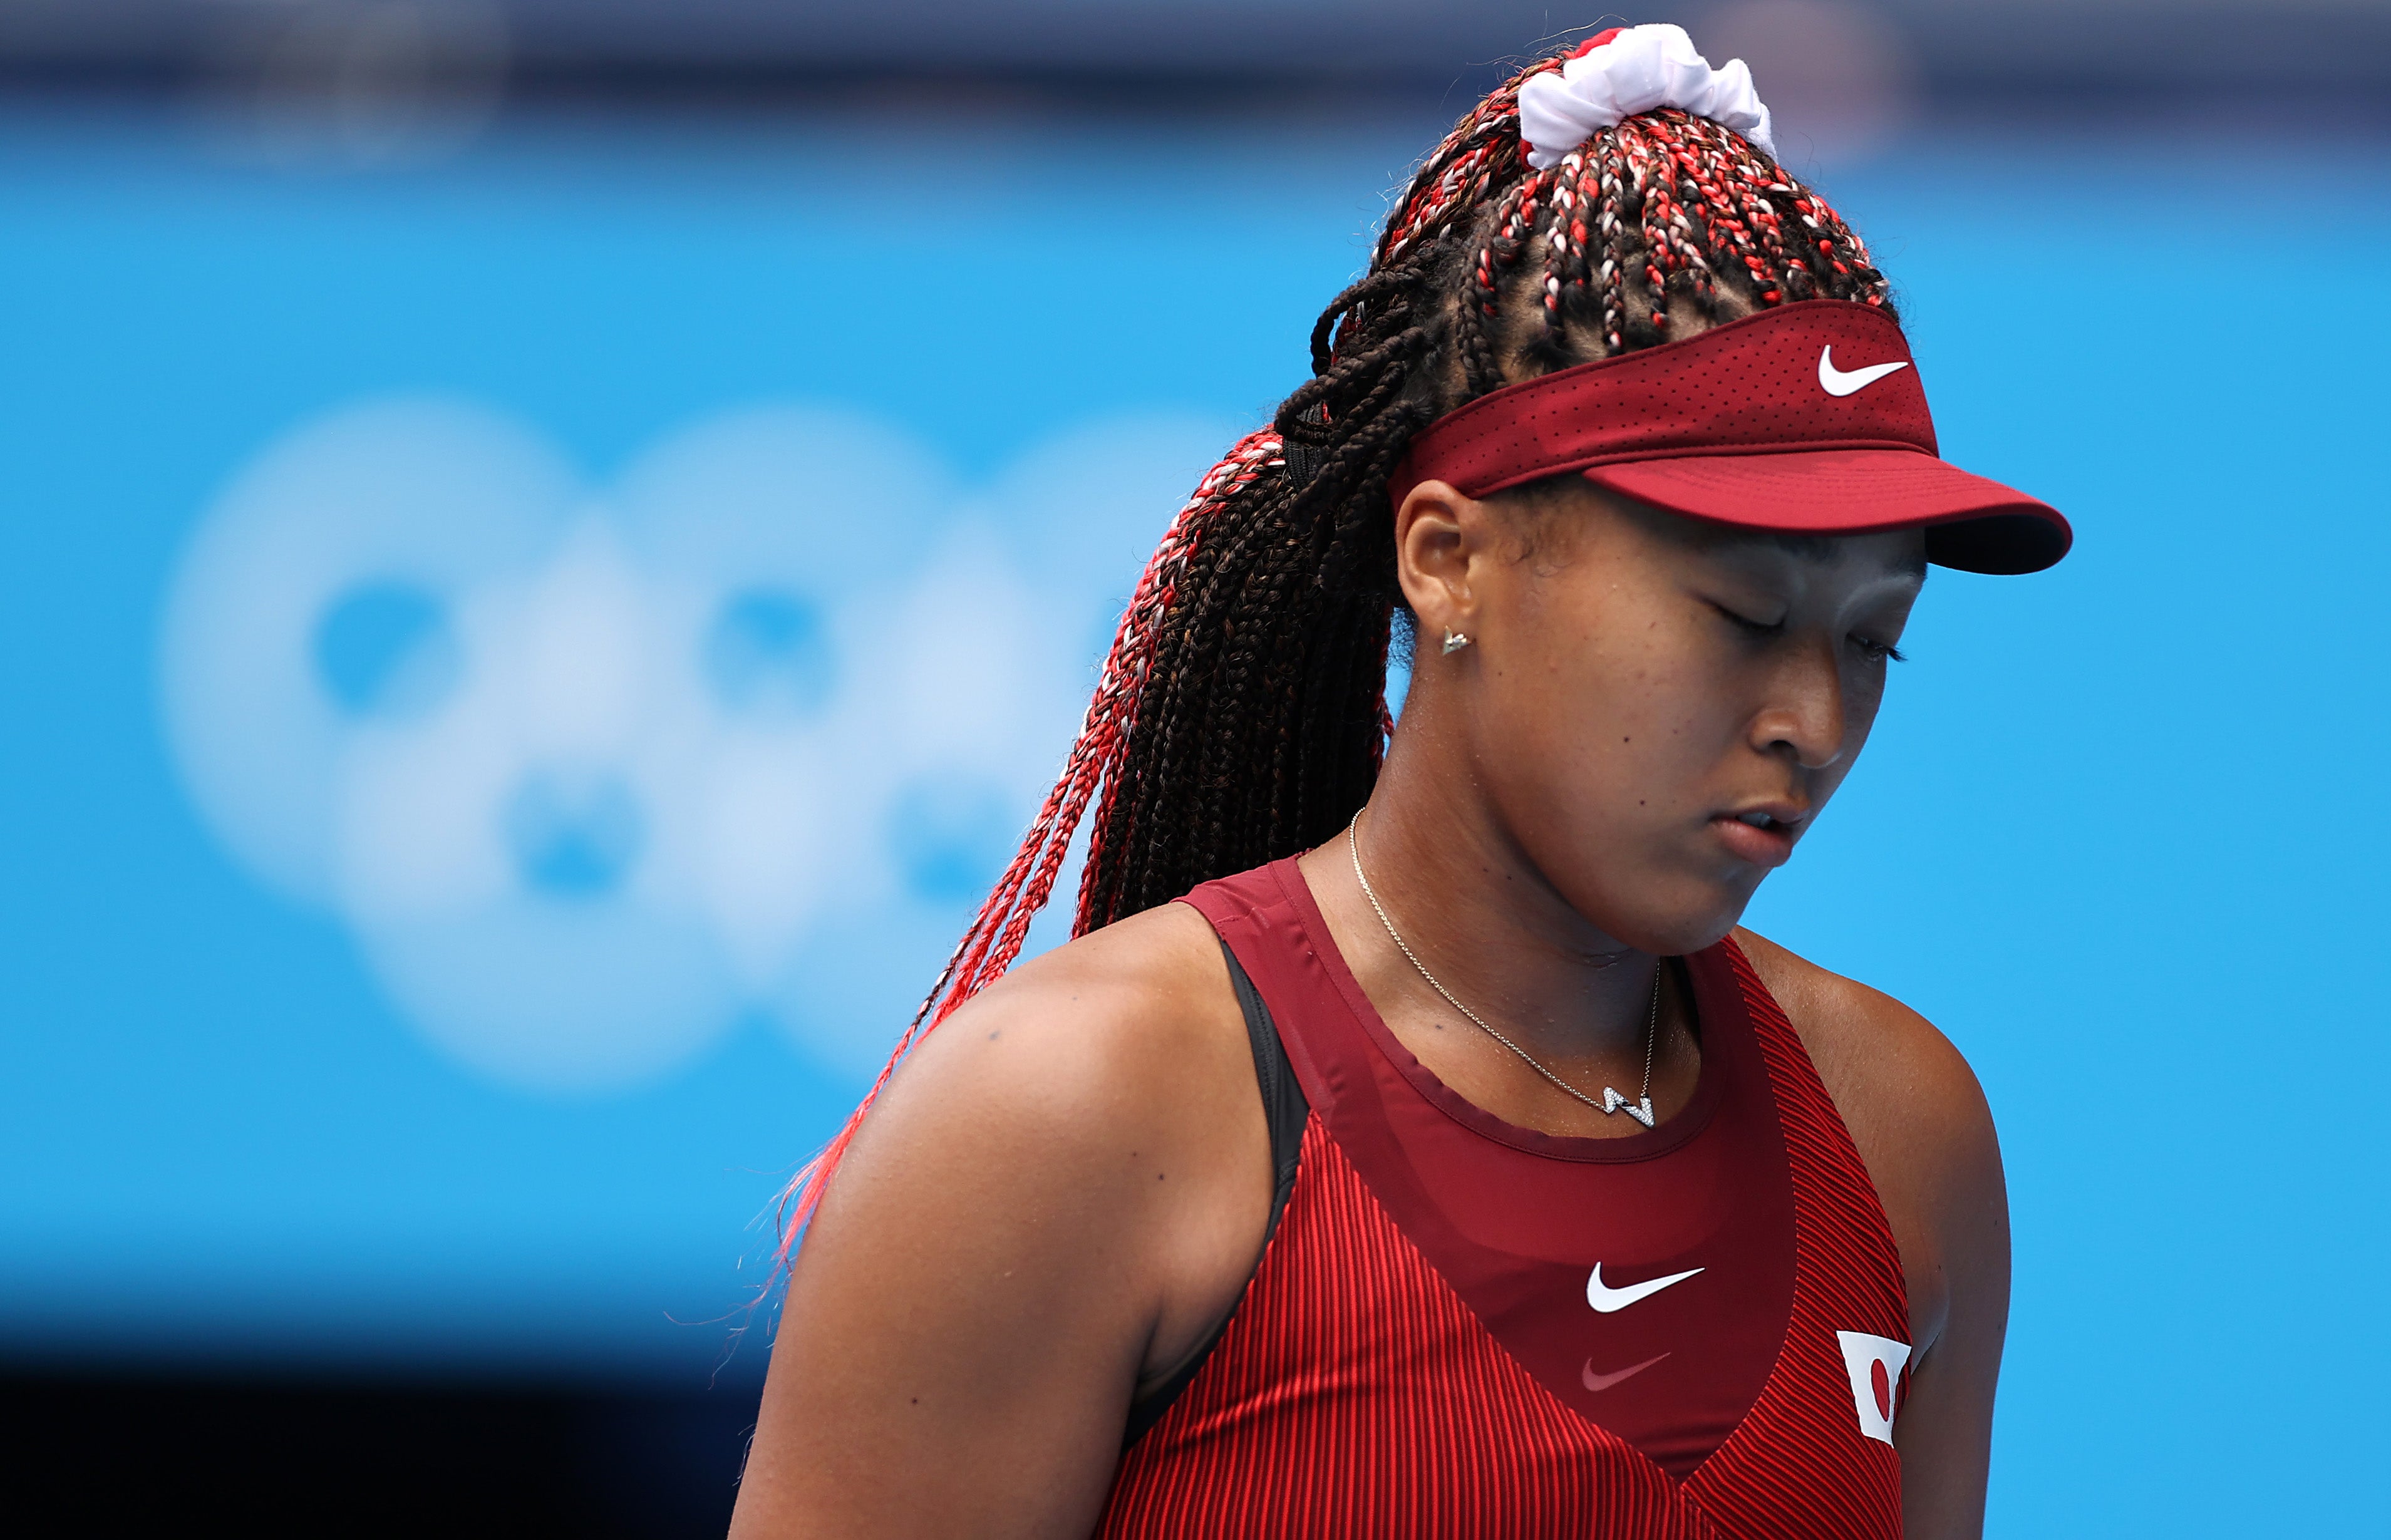 Naomi Osaka of Team Japan prepares to receive serve during her Women's Singles Second Round match against Viktorija Golubic of Team Switzerland on day three of the Tokyo 2020 Olympic Games at Ariake Tennis Park on 26 July 2021 in Tokyo, Japan